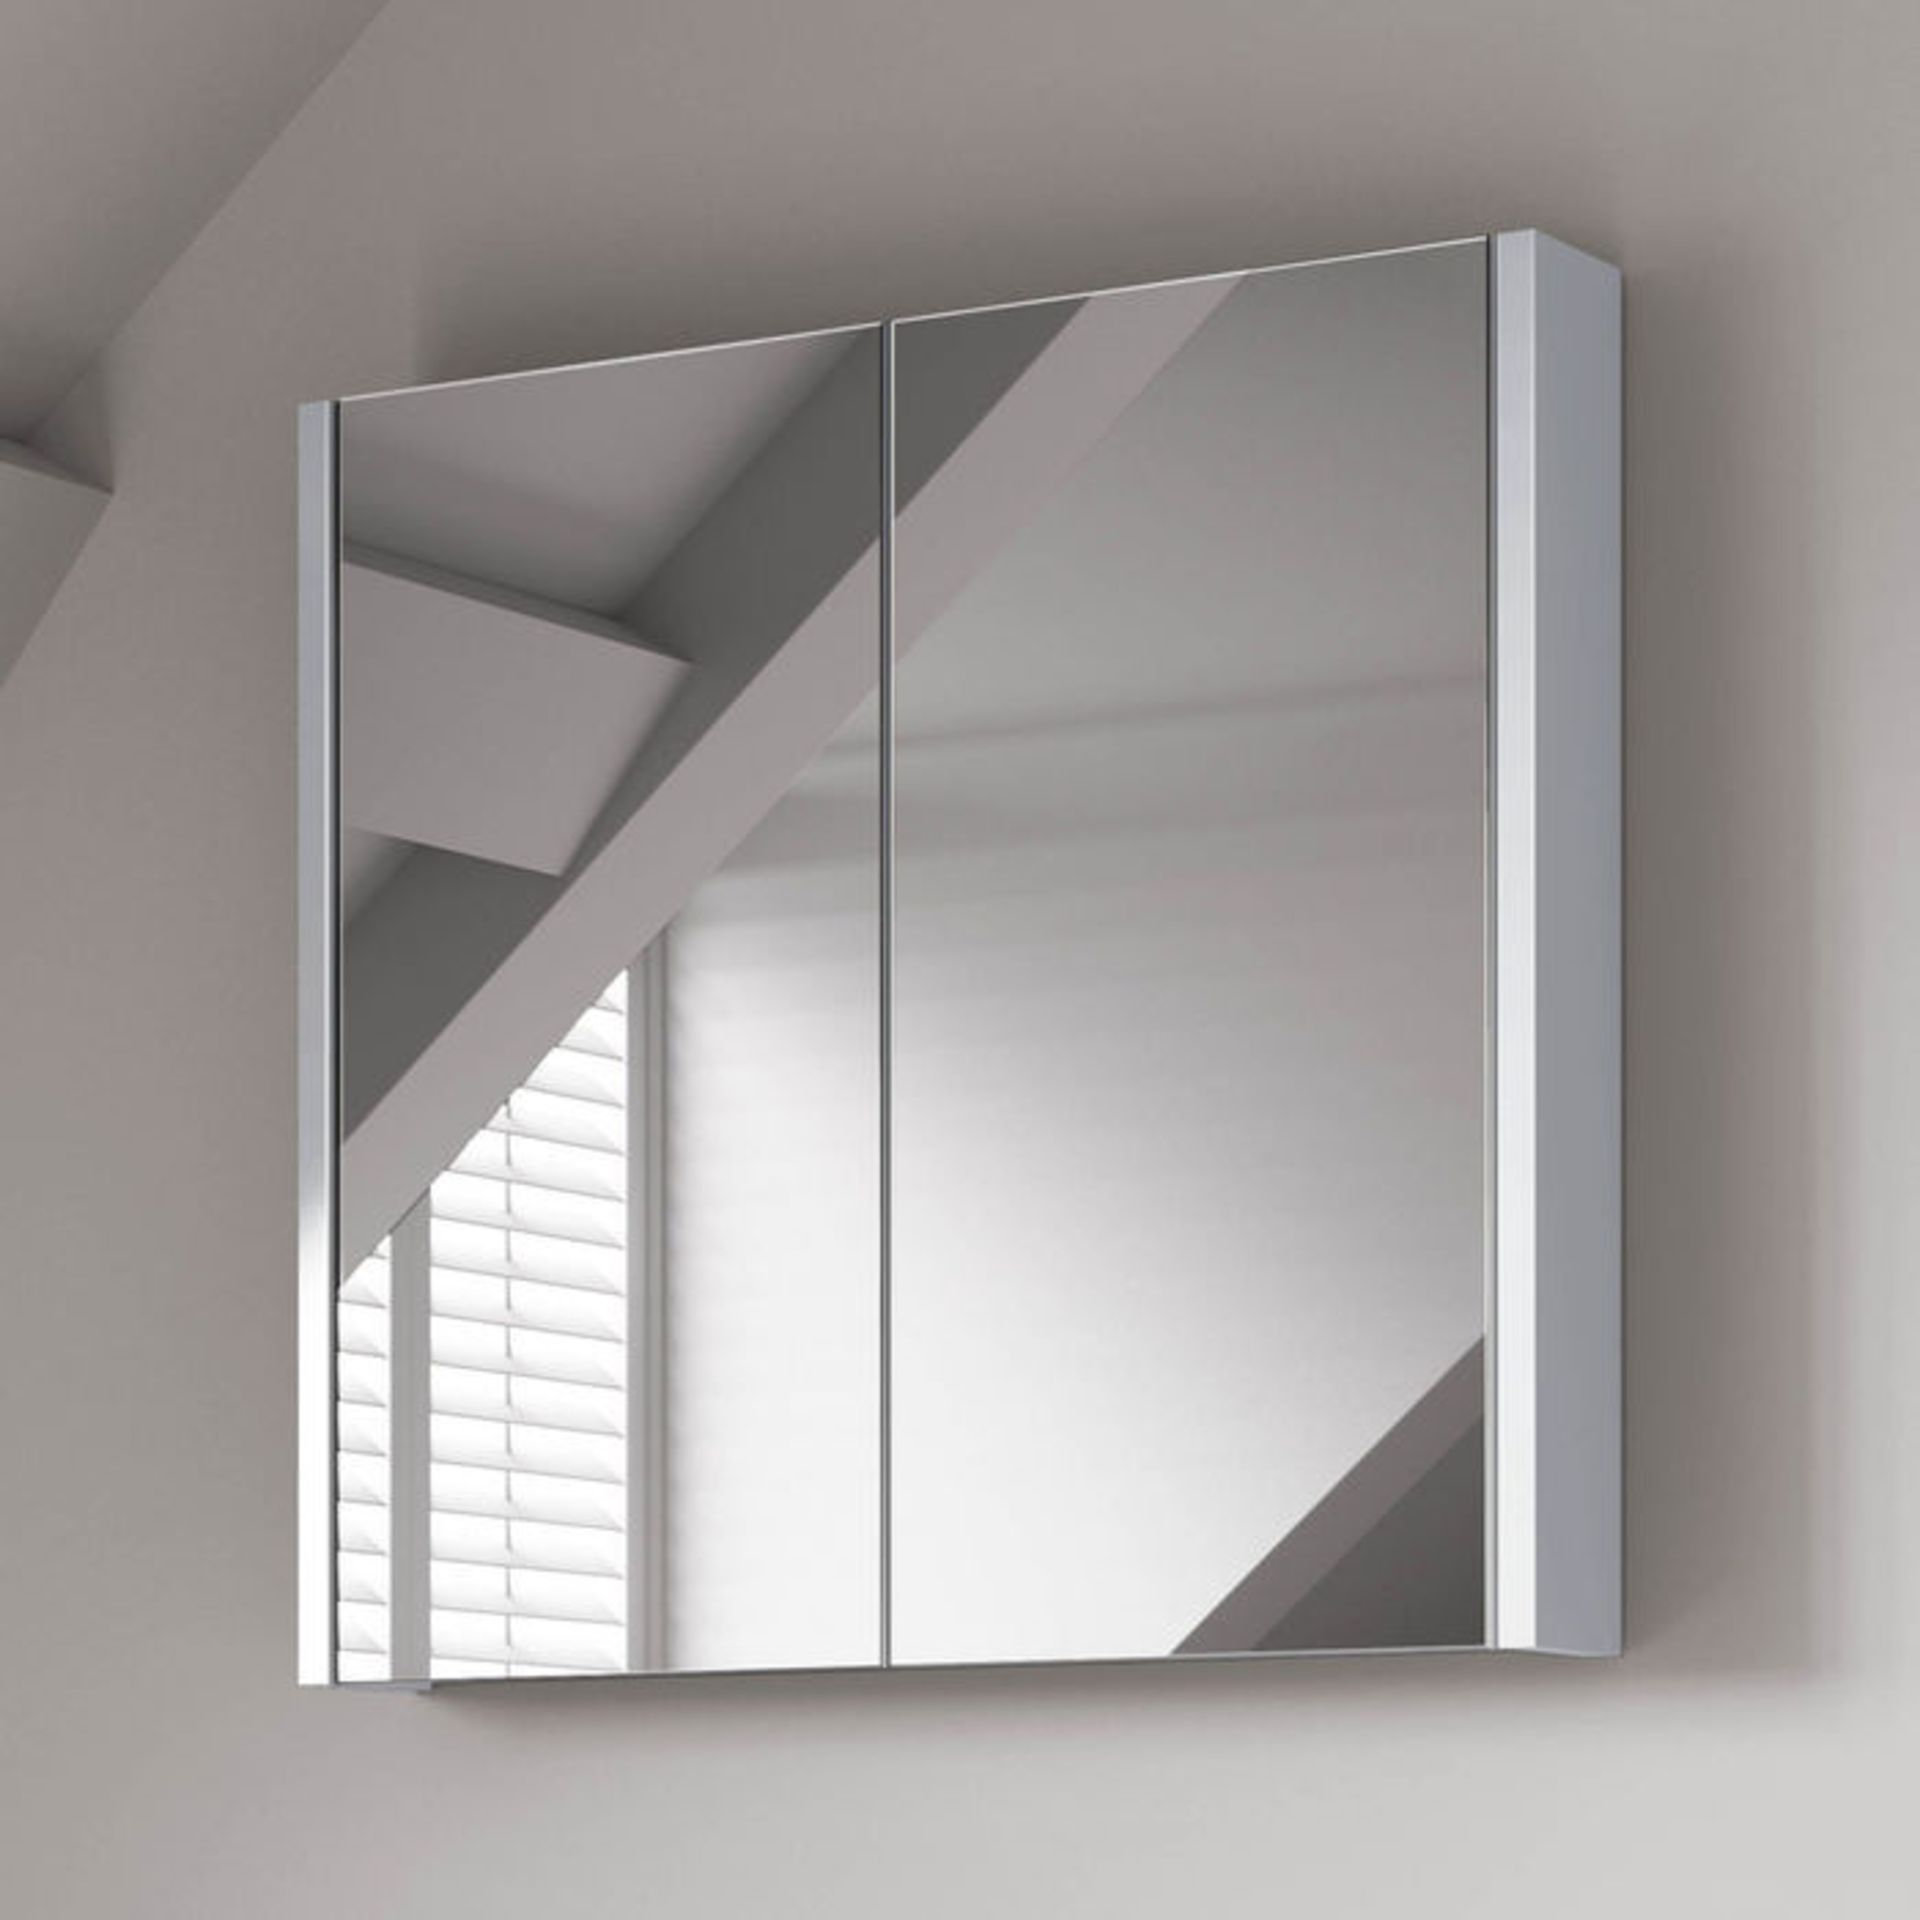 (NY154) 600mm Gloss White Double Door Mirror Cabinet. RRP £174.99. Sleek contemporary design